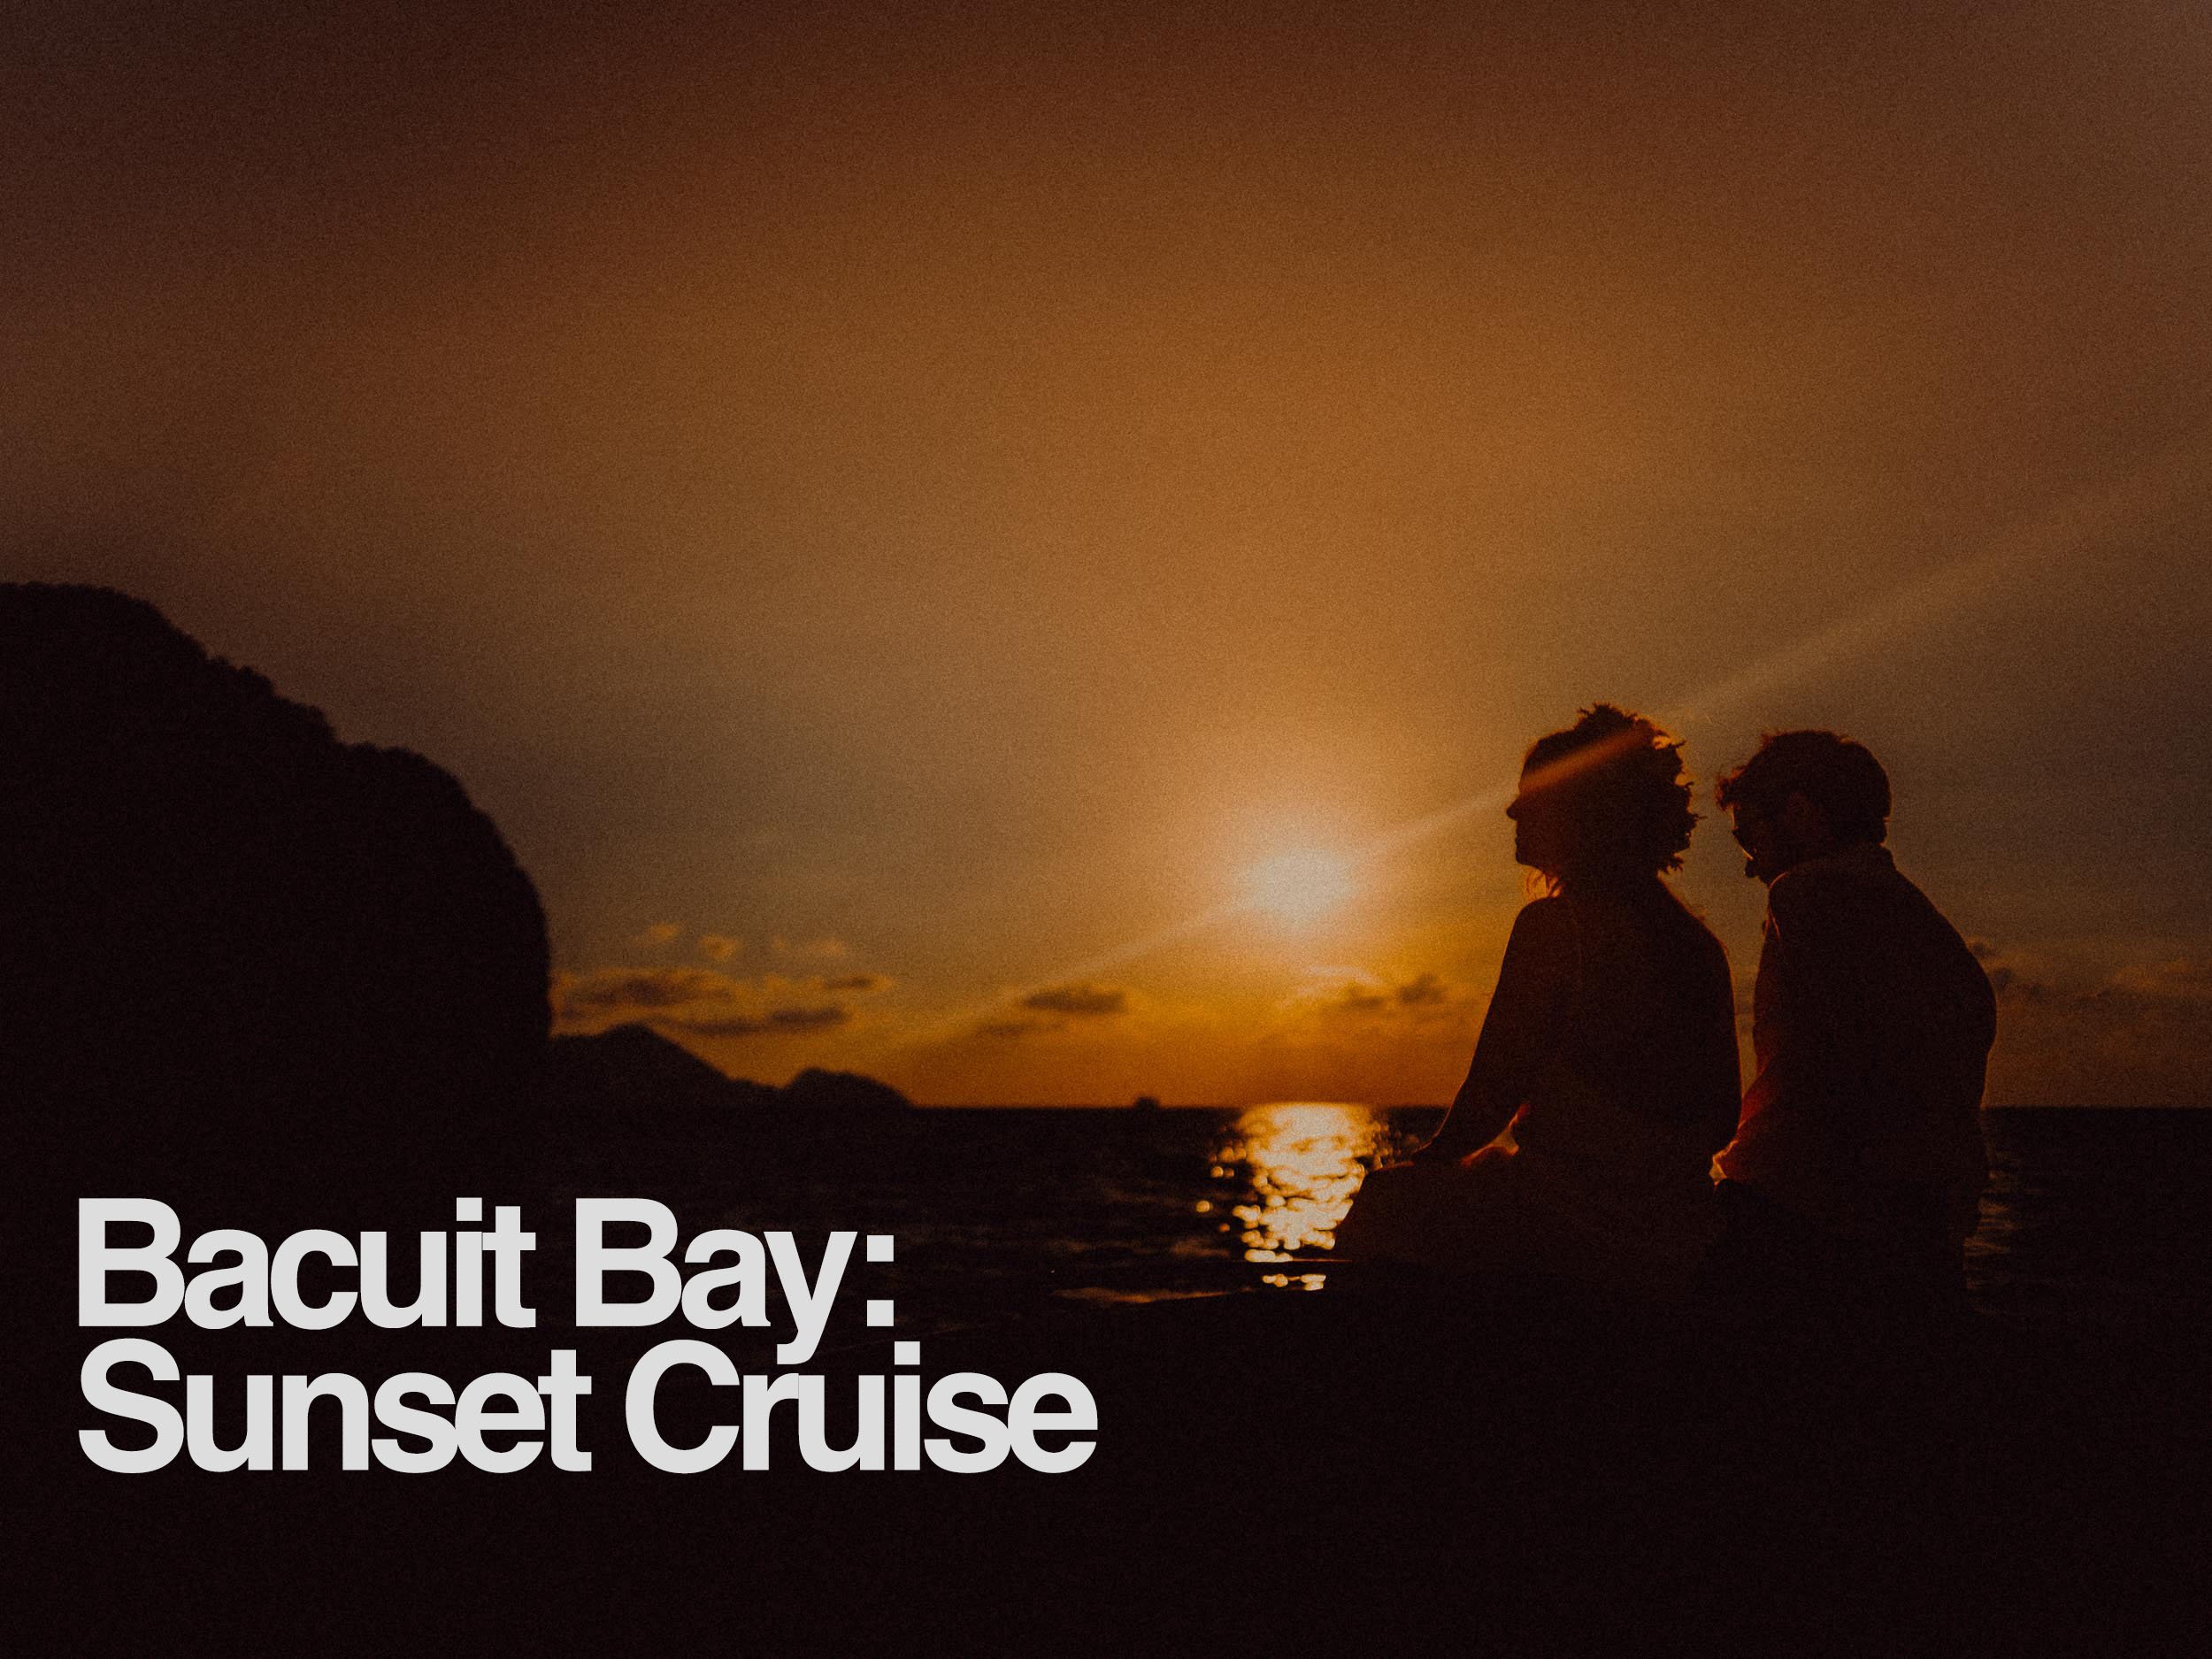 1-Bacuit Bay Sunset Cruise El Nido Resorts Palawan Philippines-Golden hour portraits of the bride and groom on a speed boat, El Nido, Palawan, Philippines, Southeast Asia, May 2019, Sony Alpha.jpg